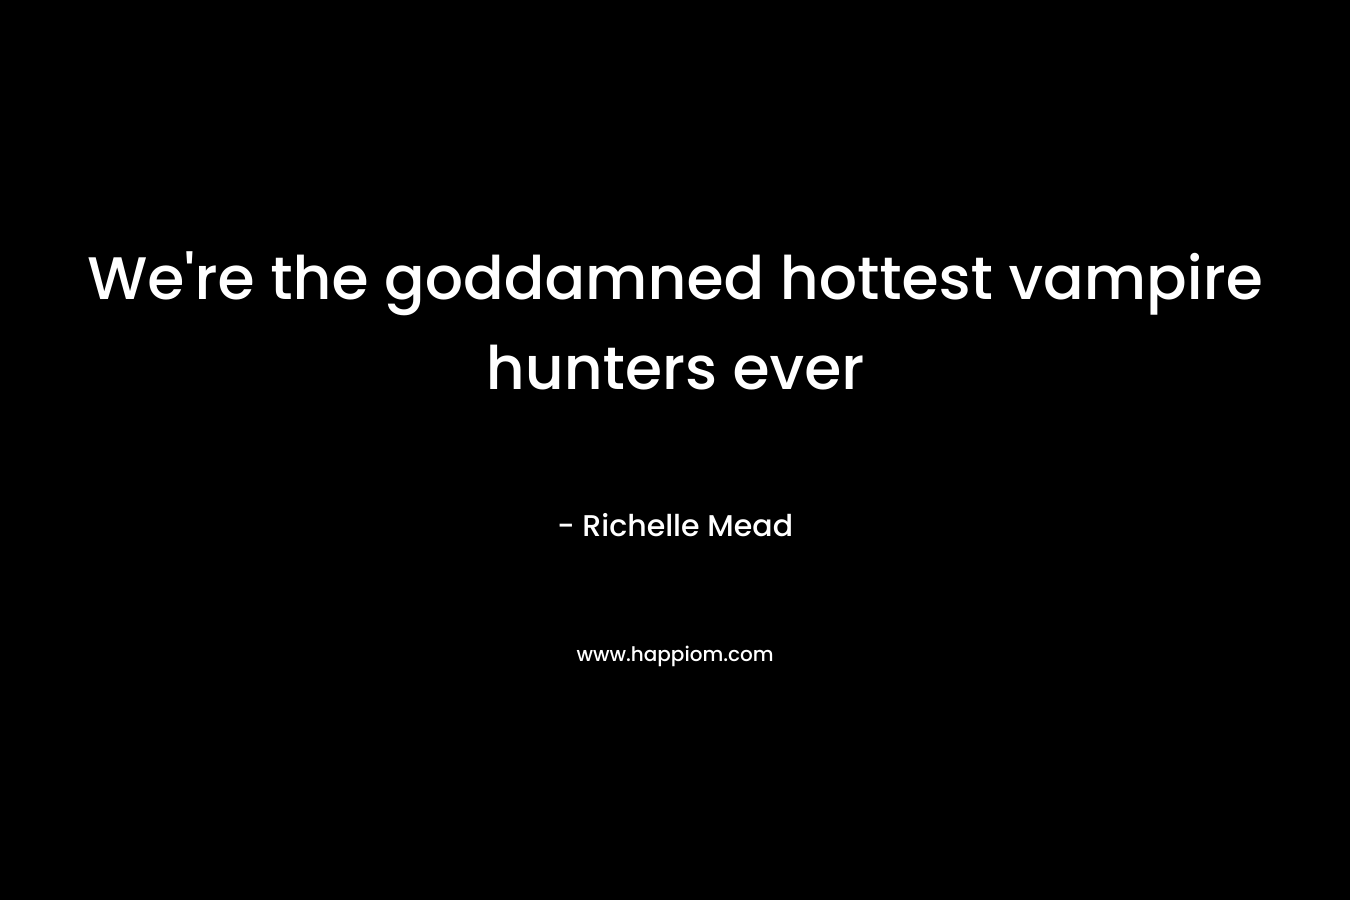 We’re the goddamned hottest vampire hunters ever – Richelle Mead